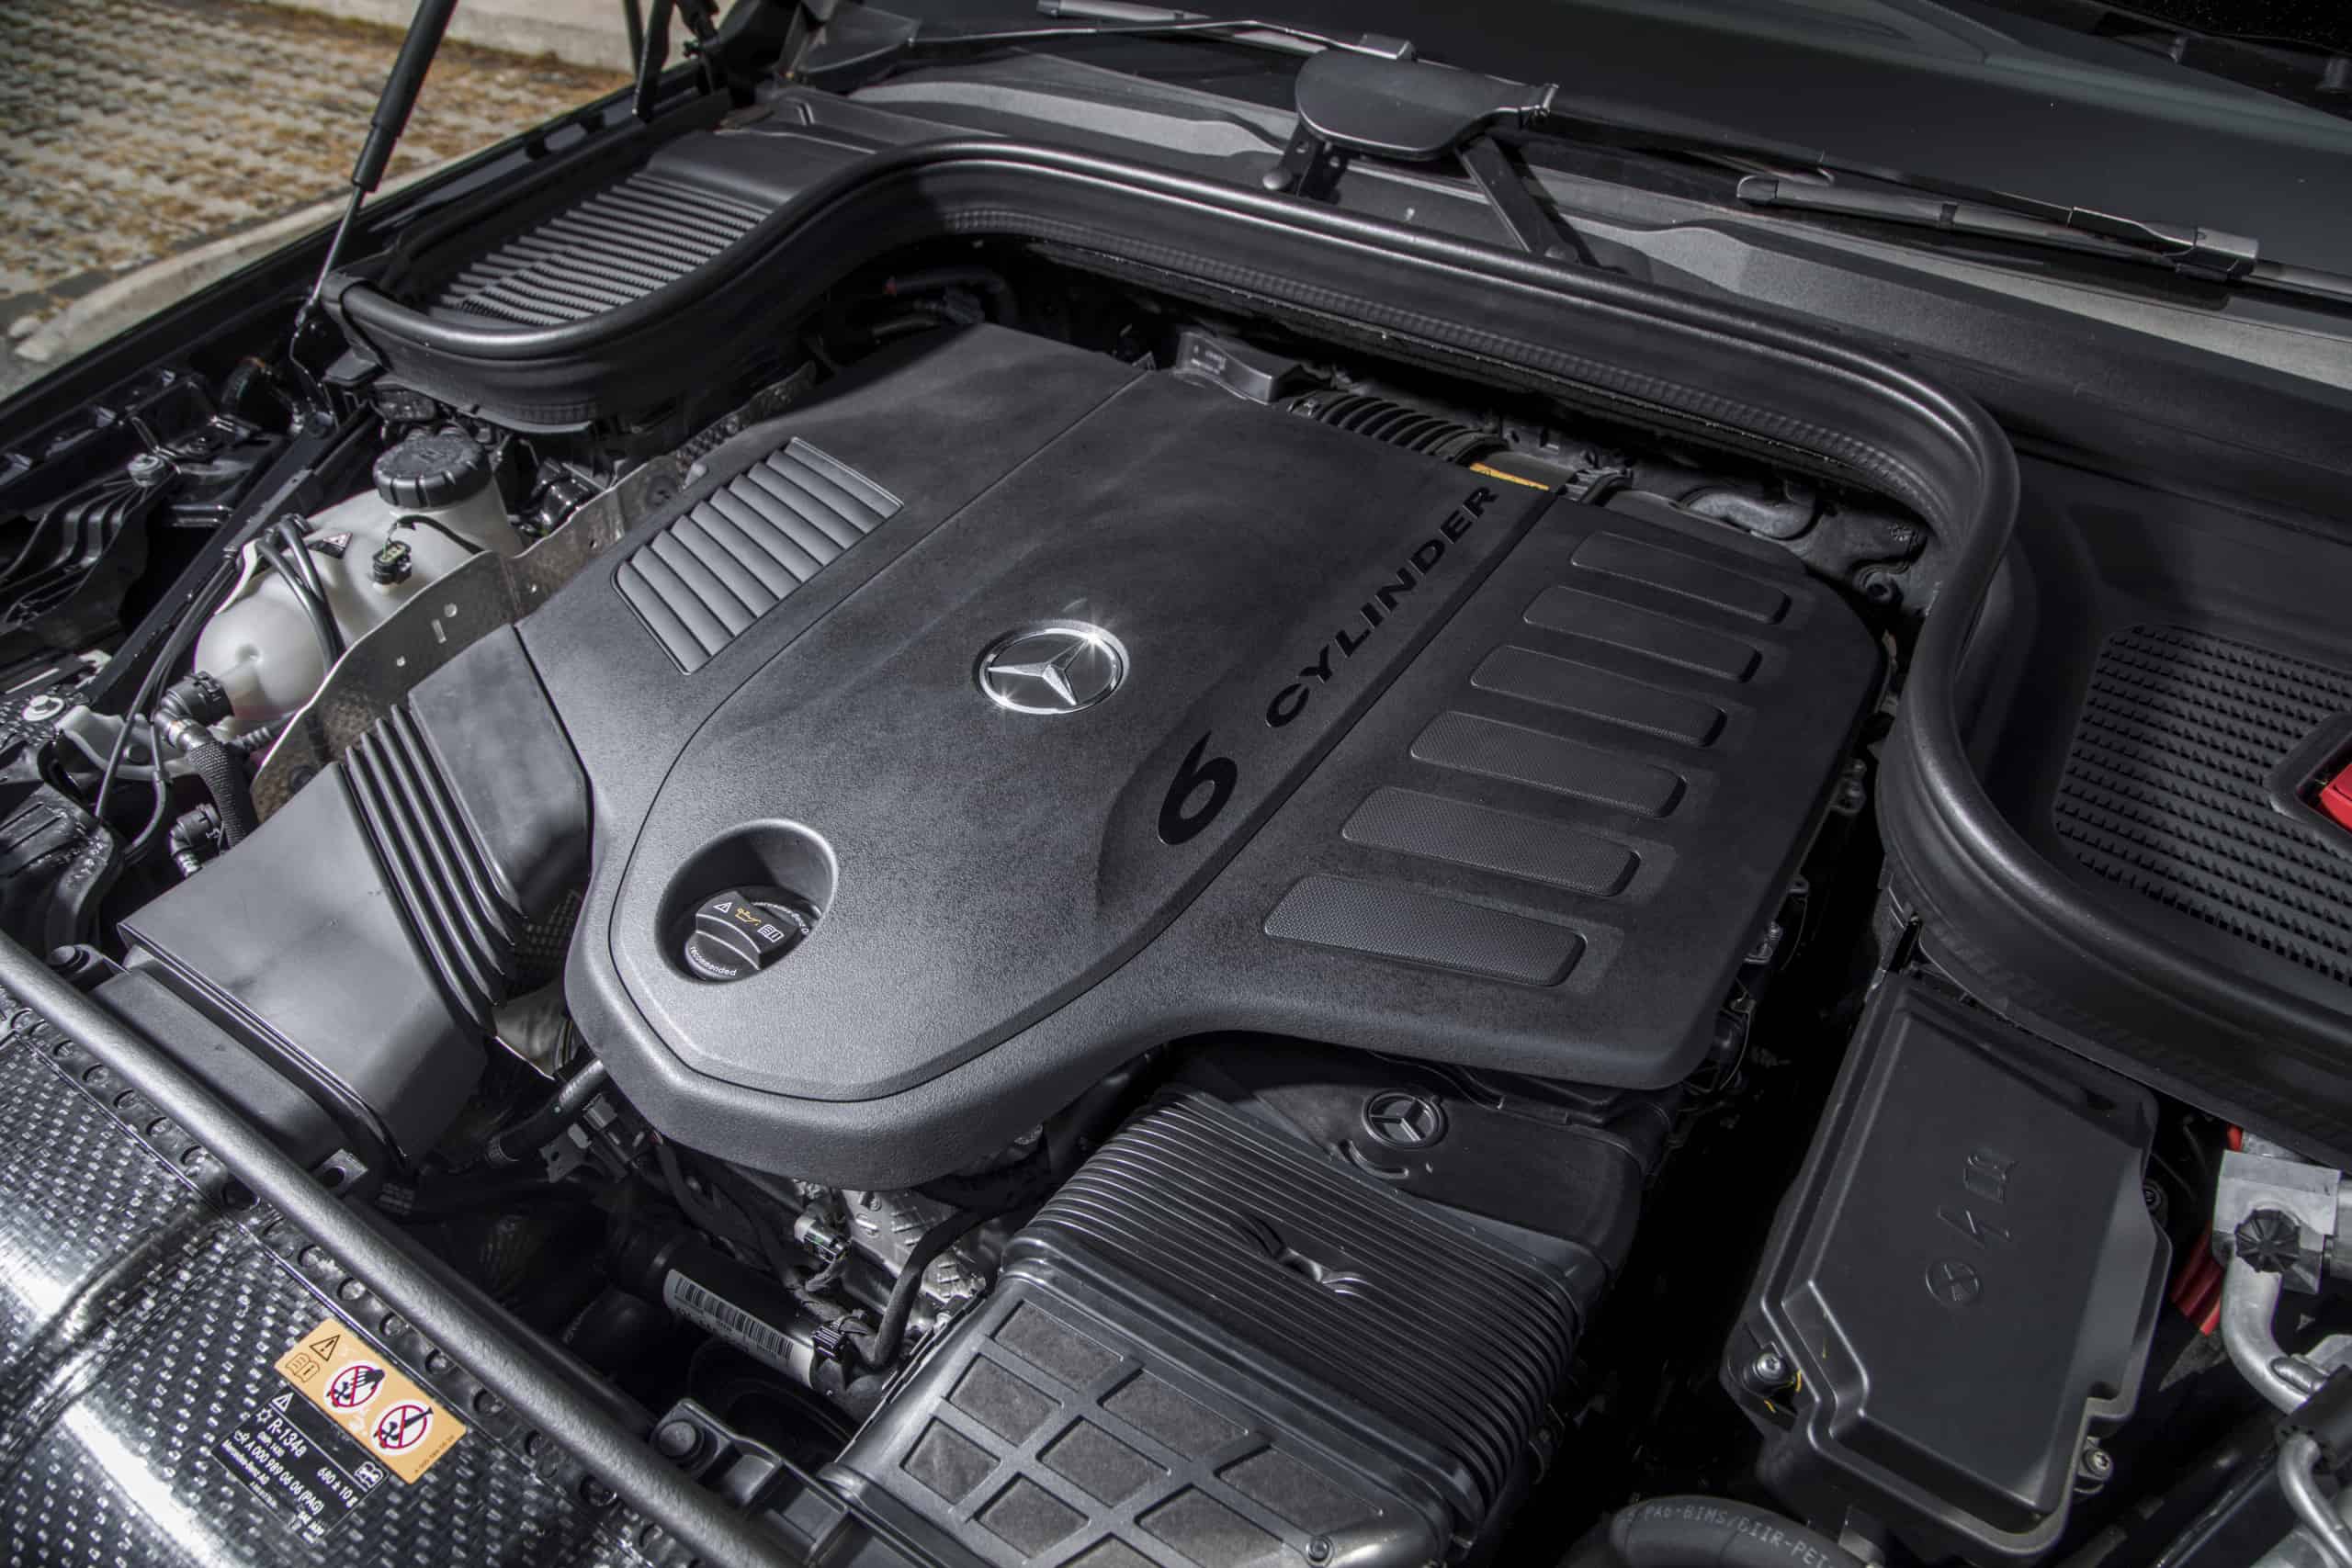 Mercedes Benz Malaysia GLE 450 4Matic Coupe engine